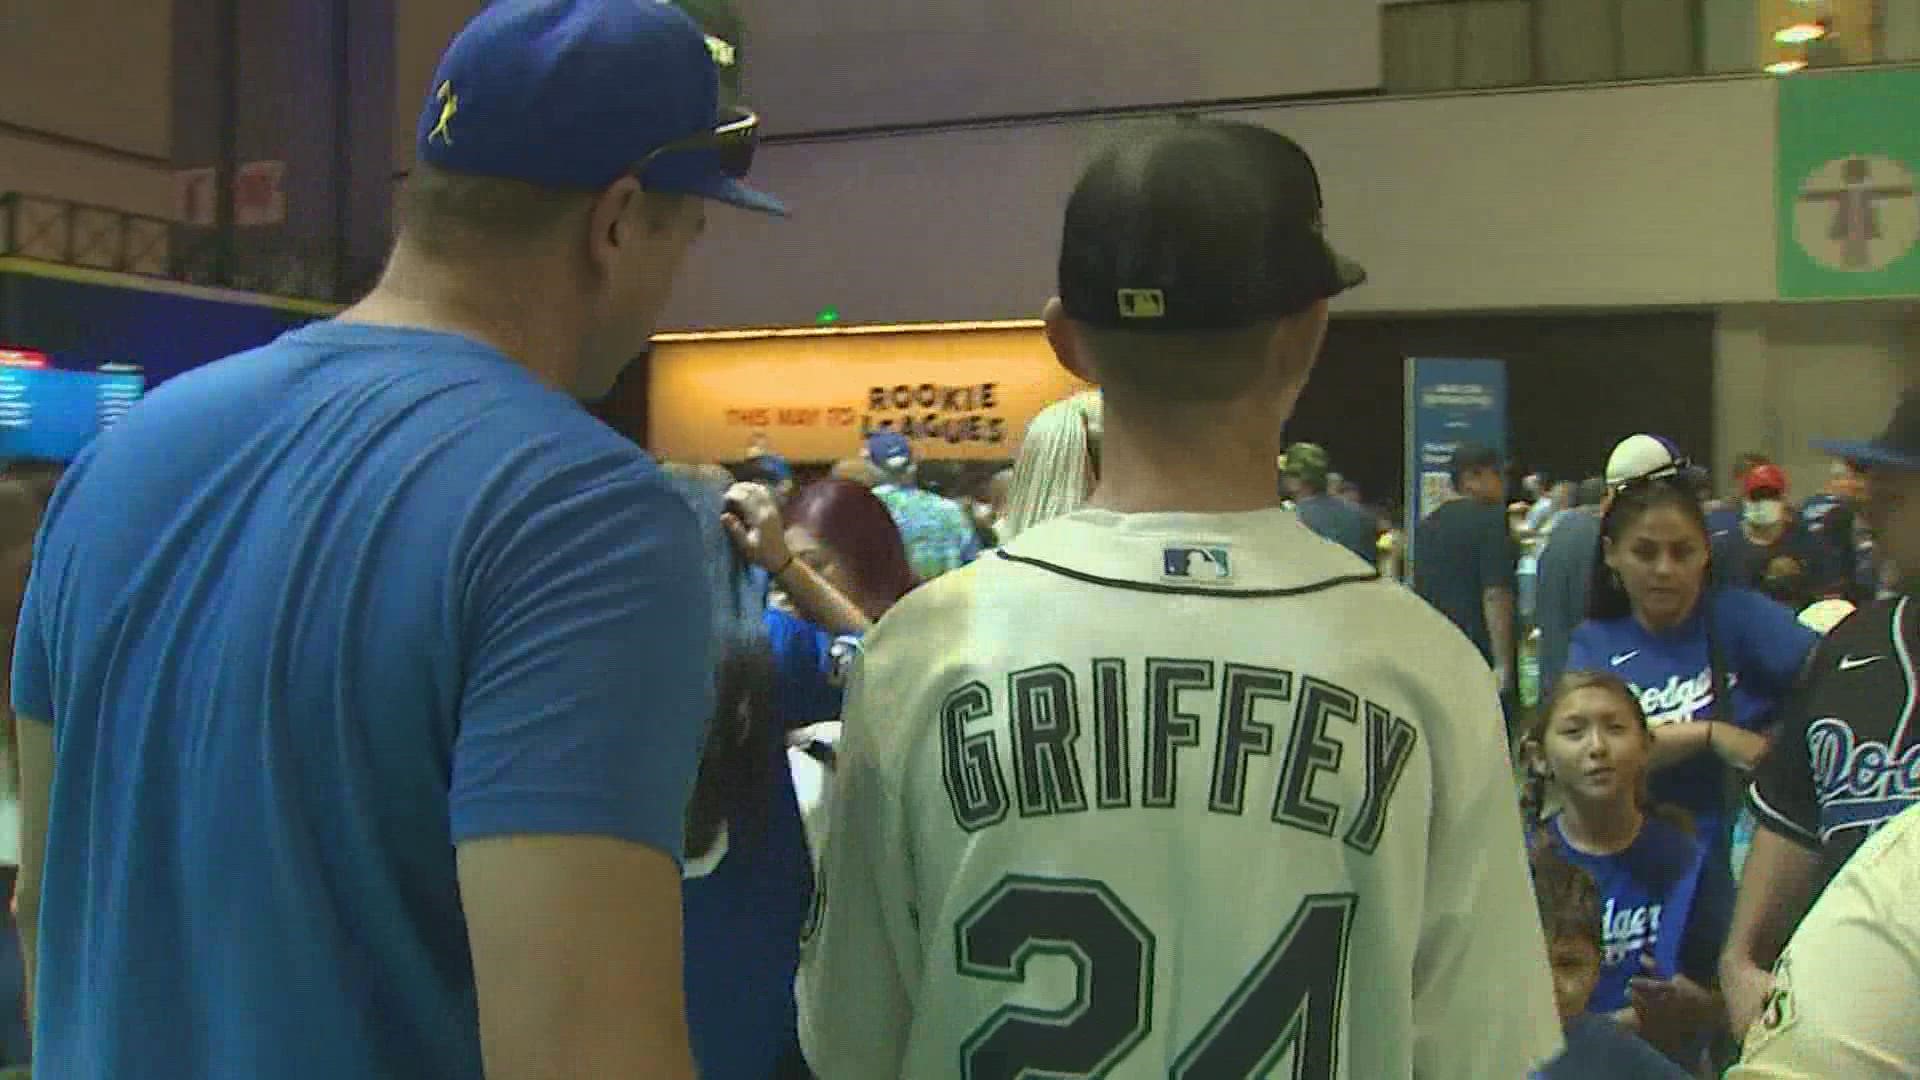 In a sea of Dodger Blue, there was a tint of Mariners teal at Sunday's Fan Fest.